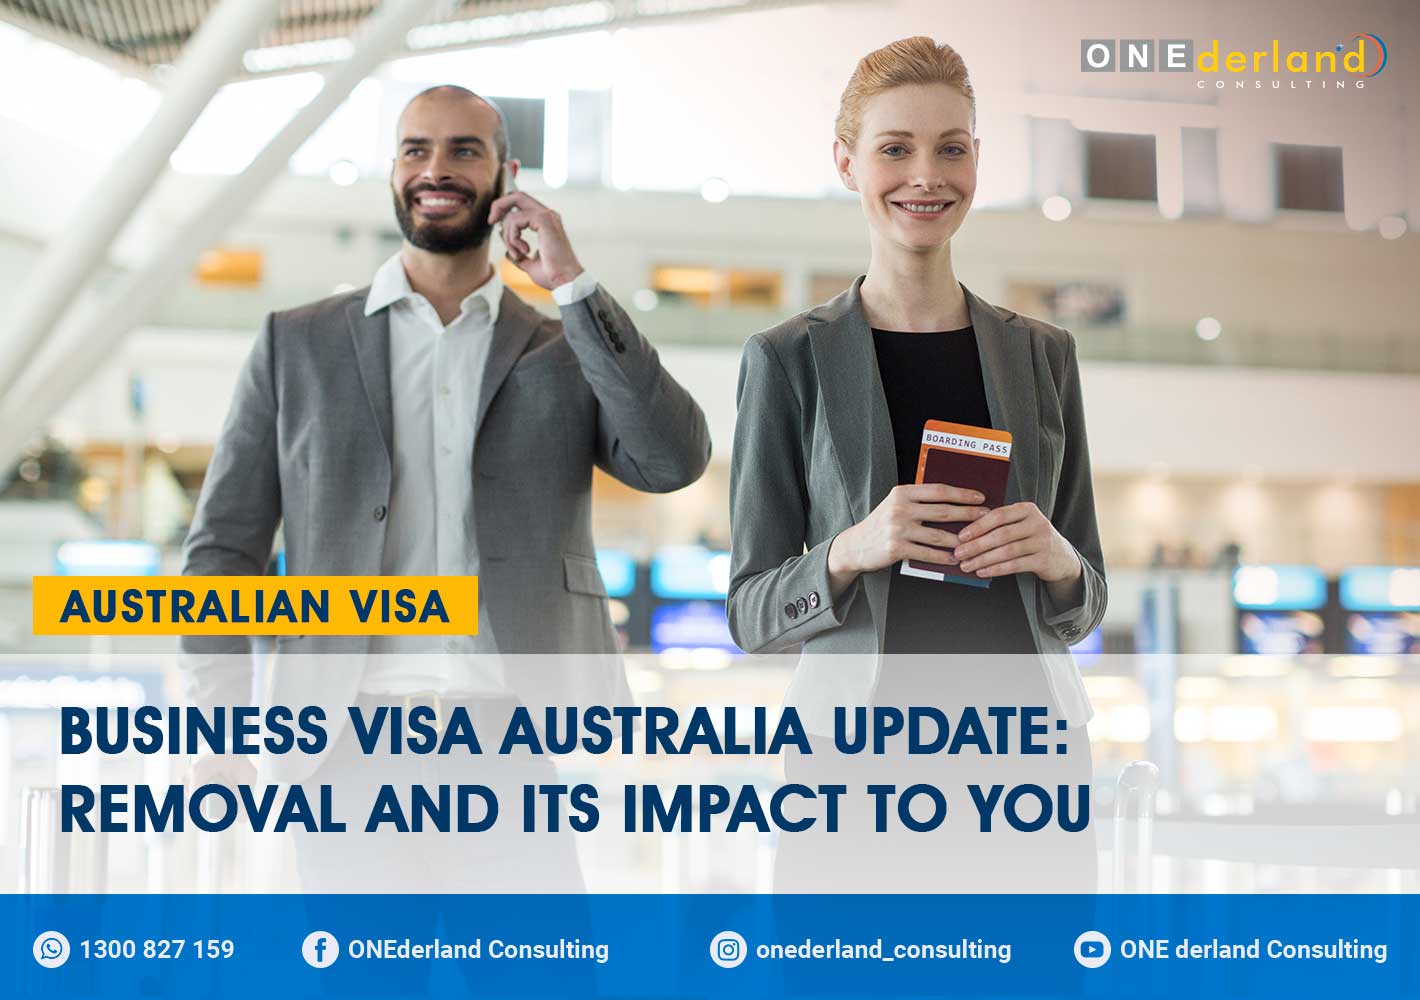 Business Visa Australia Update - Removal and Its Impact to You